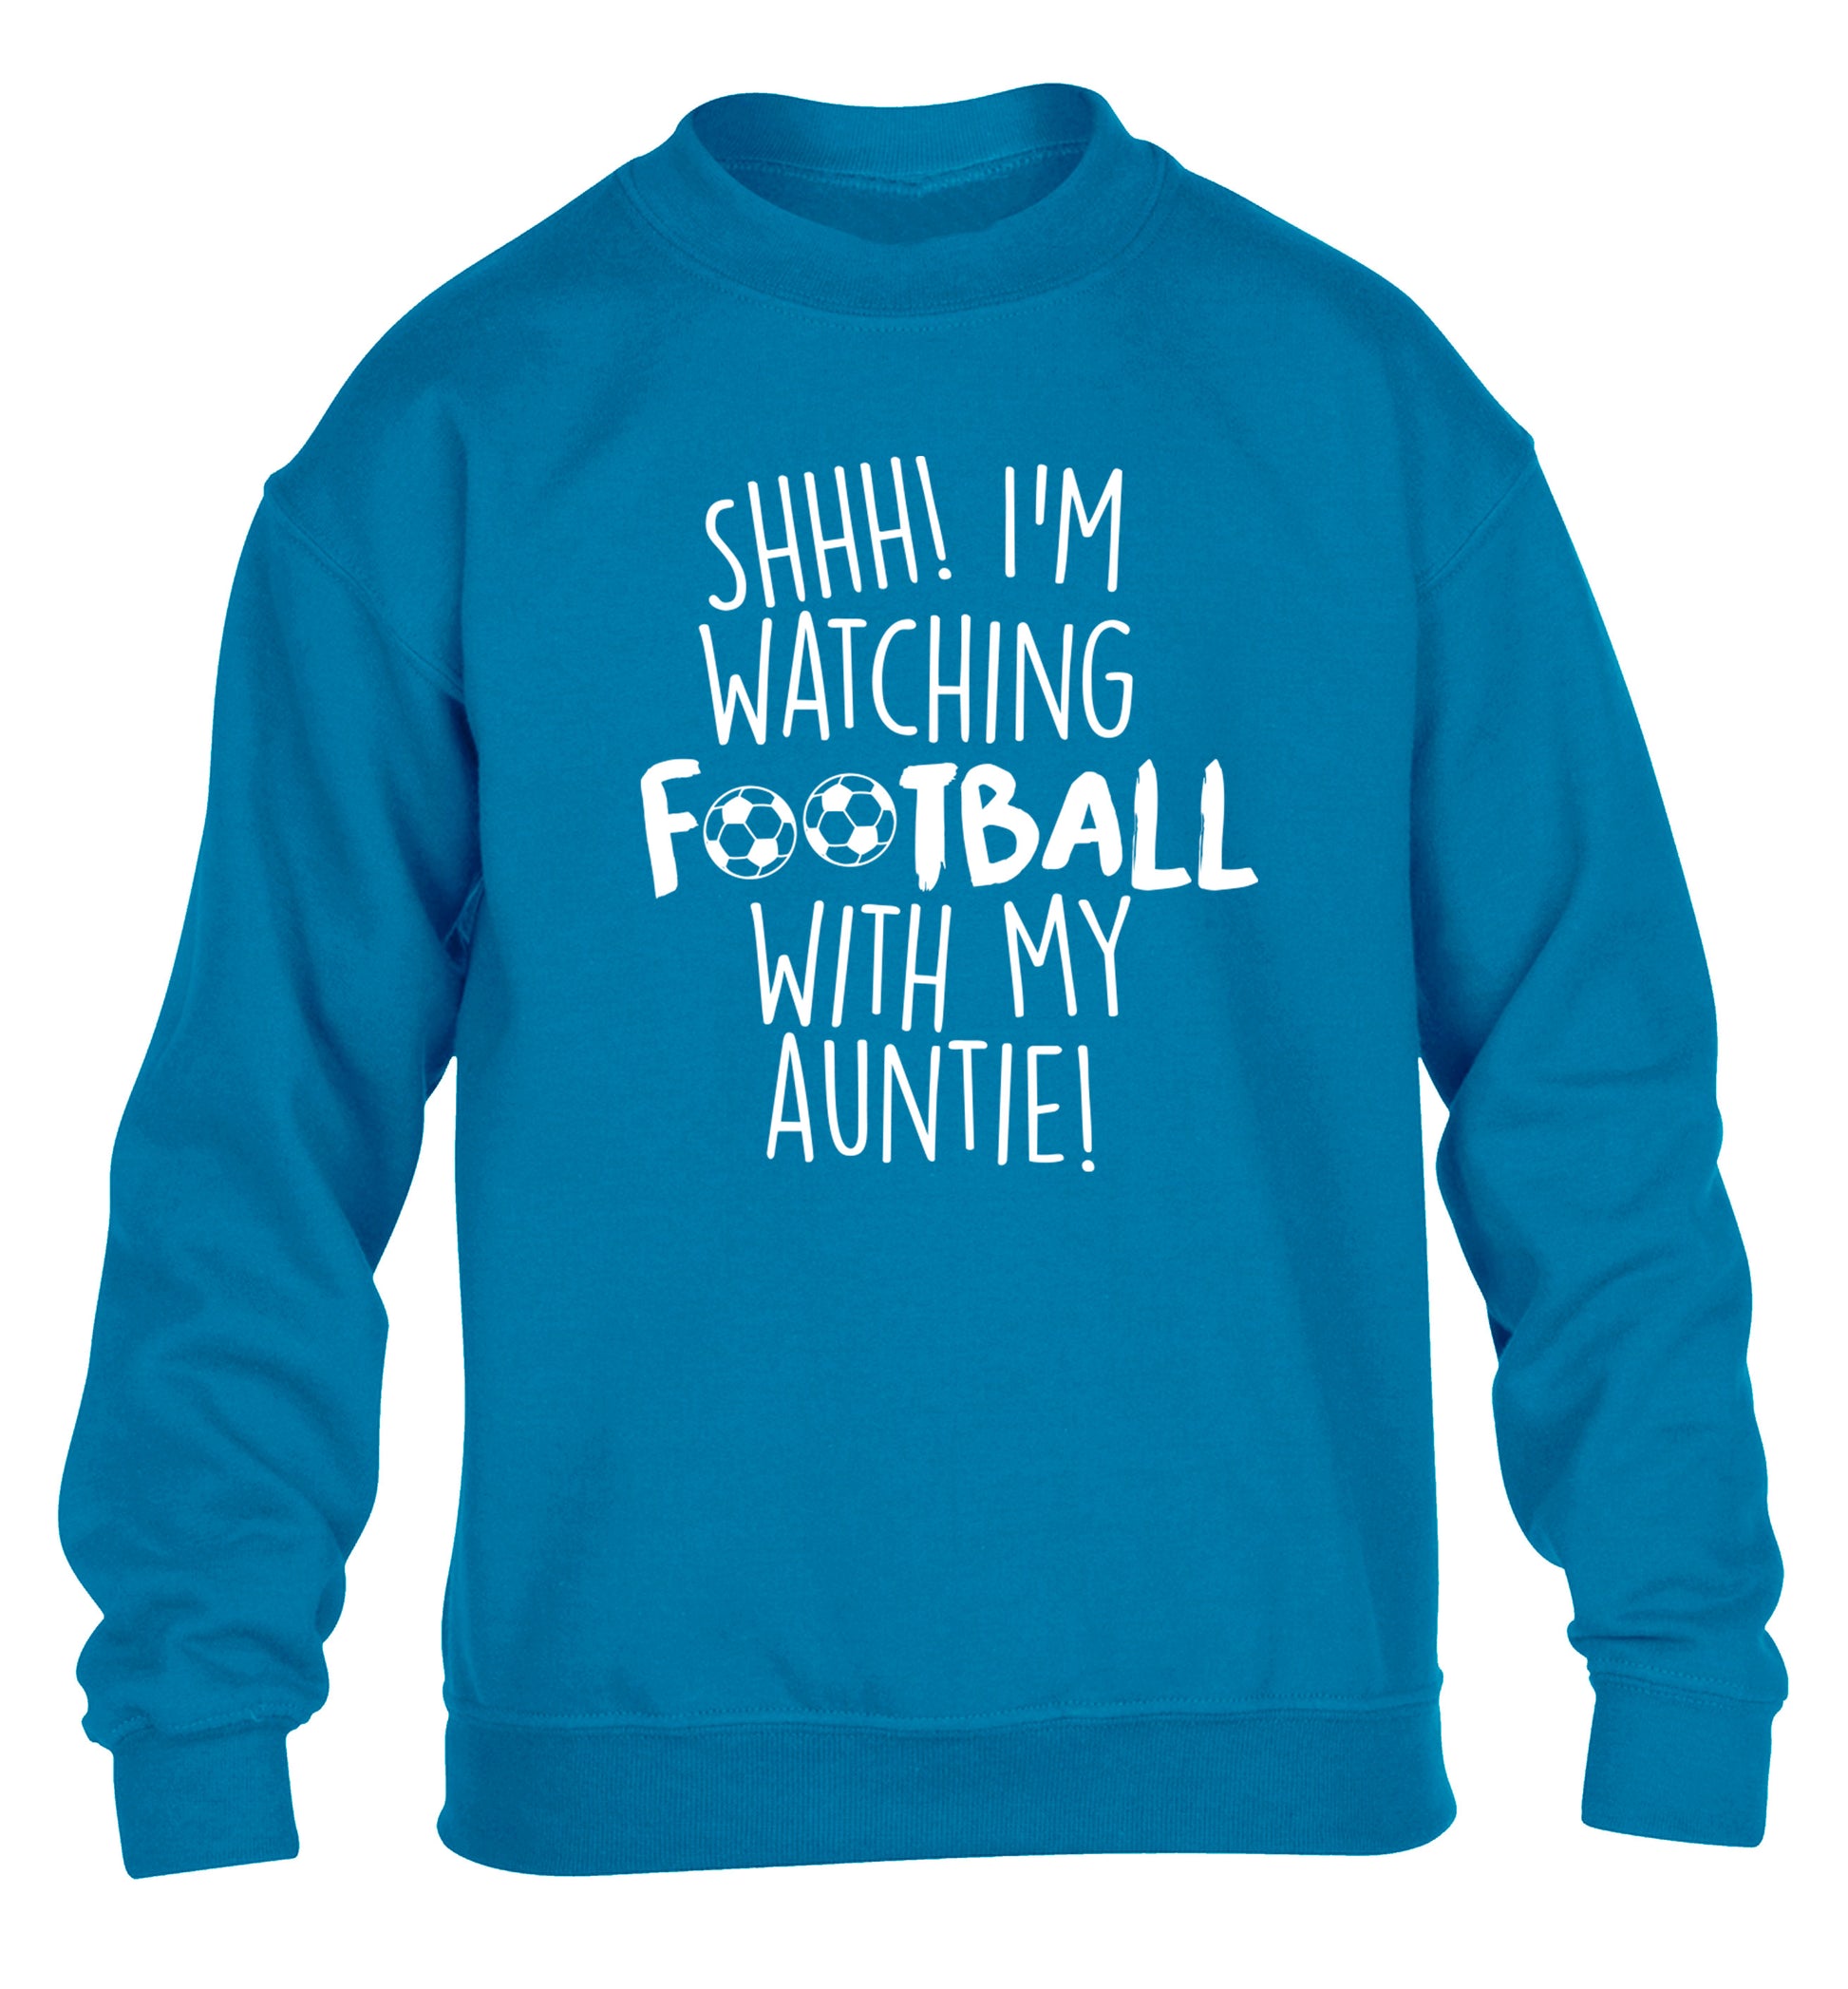 Shhh I'm watching football with my auntie children's blue sweater 12-14 Years